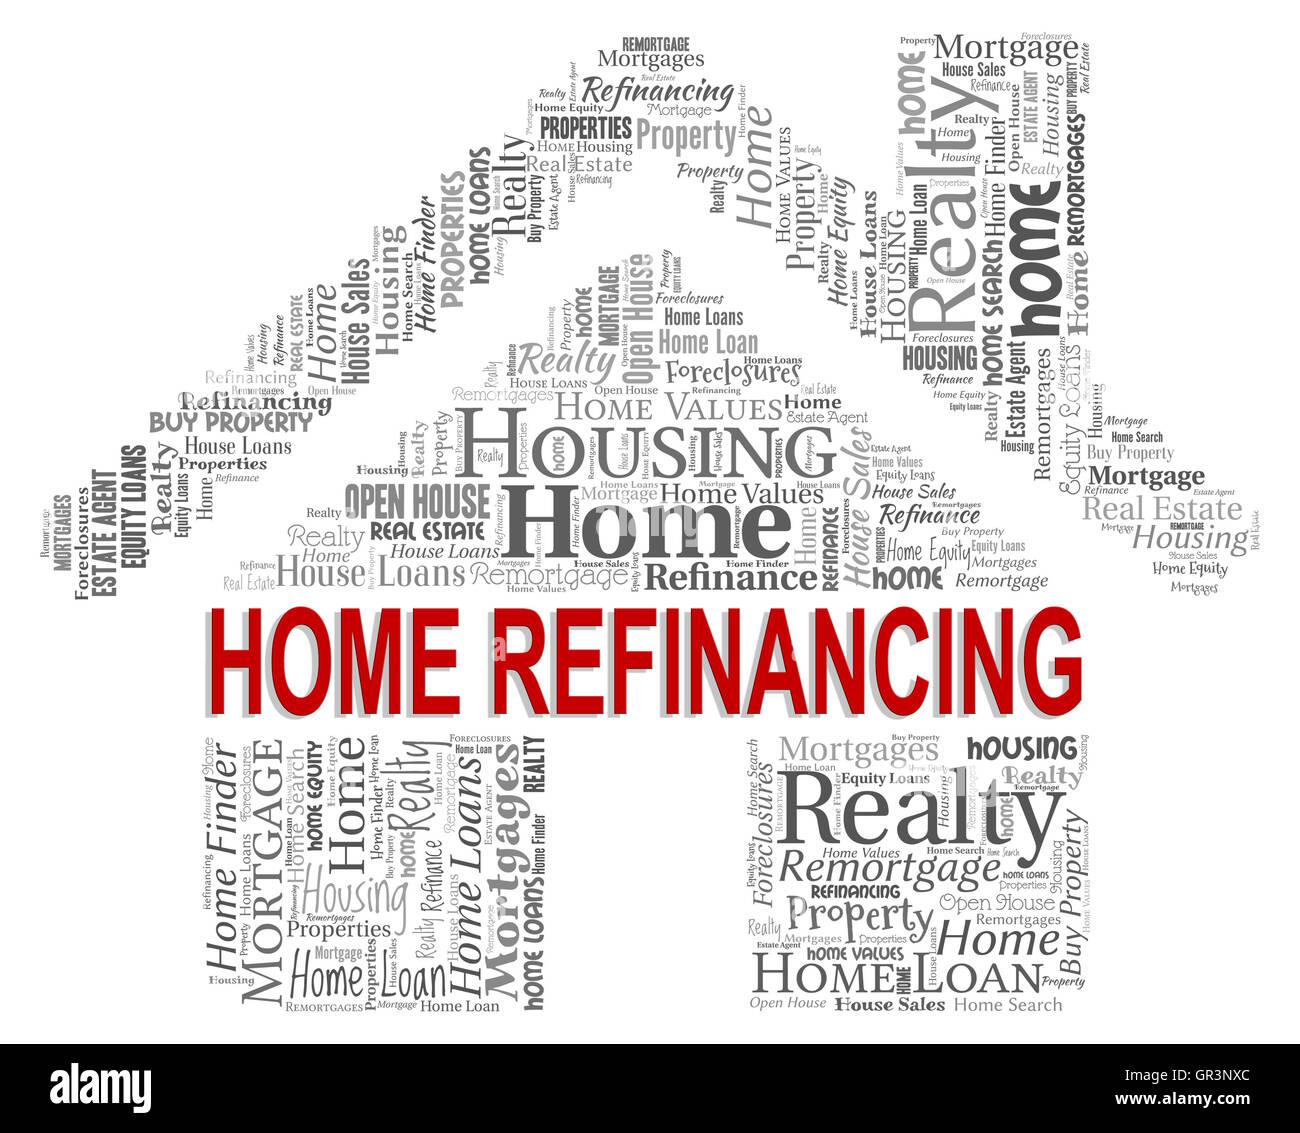 Home Refinancing Meaning Residence Debt And Homes Stock Photo